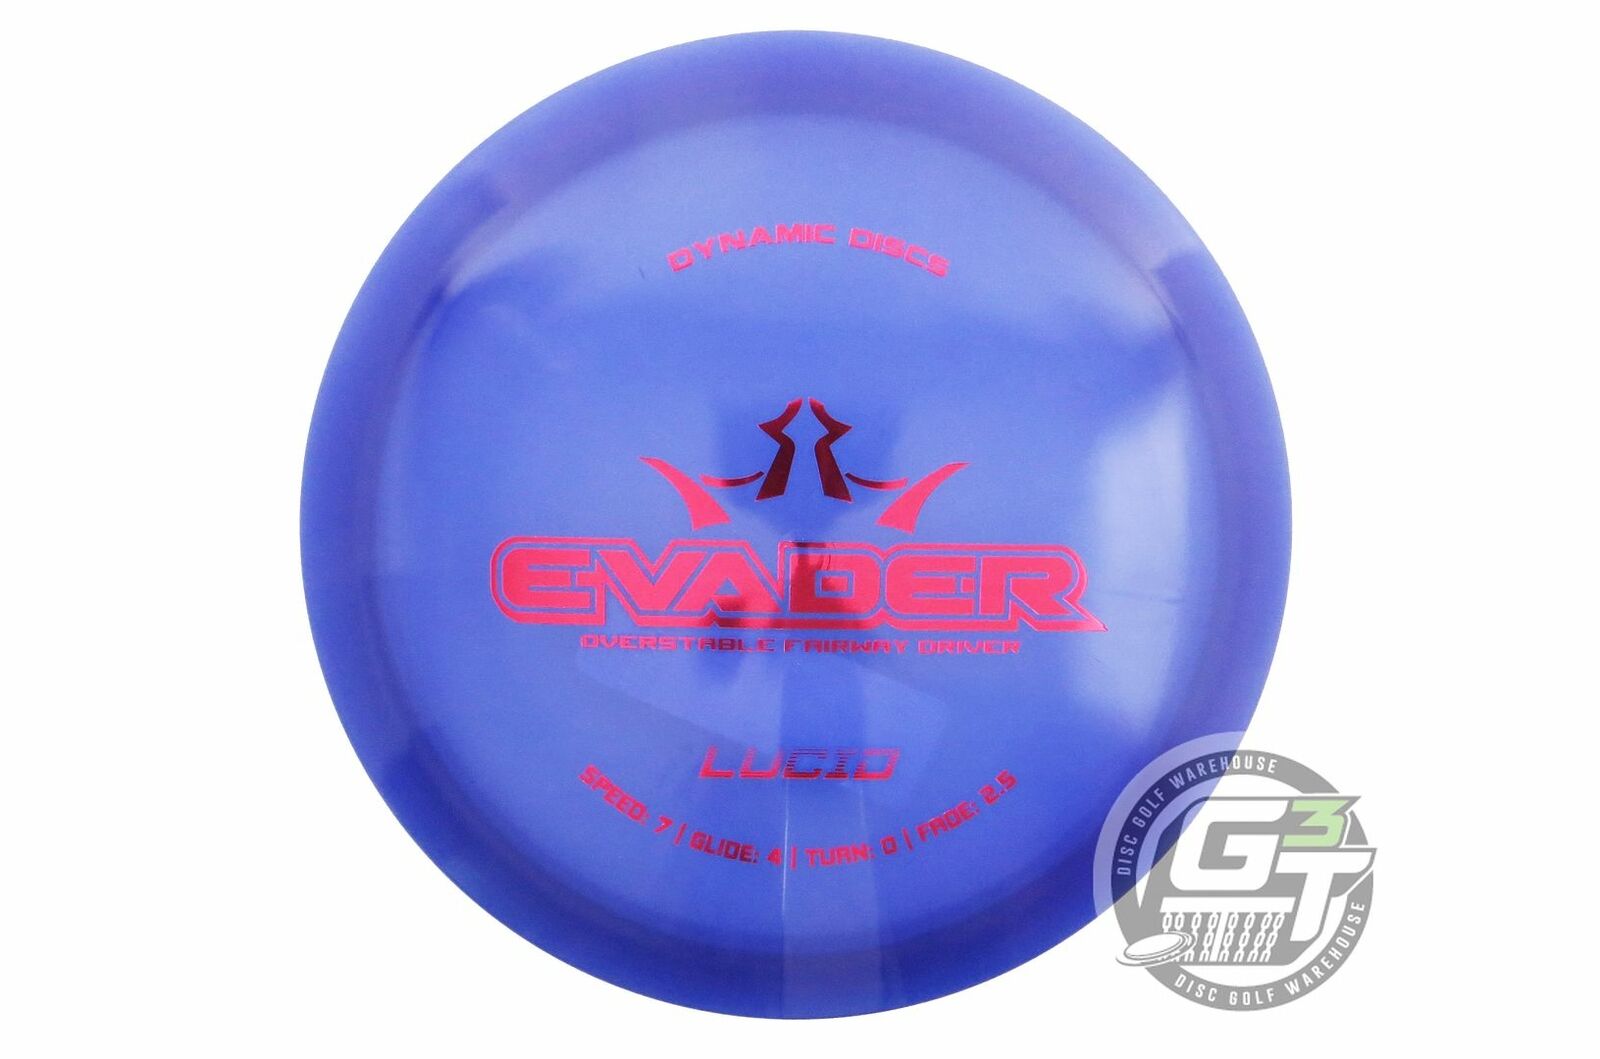 Dynamic Discs Lucid Evader Fairway Driver Golf Disc (Individually Listed)